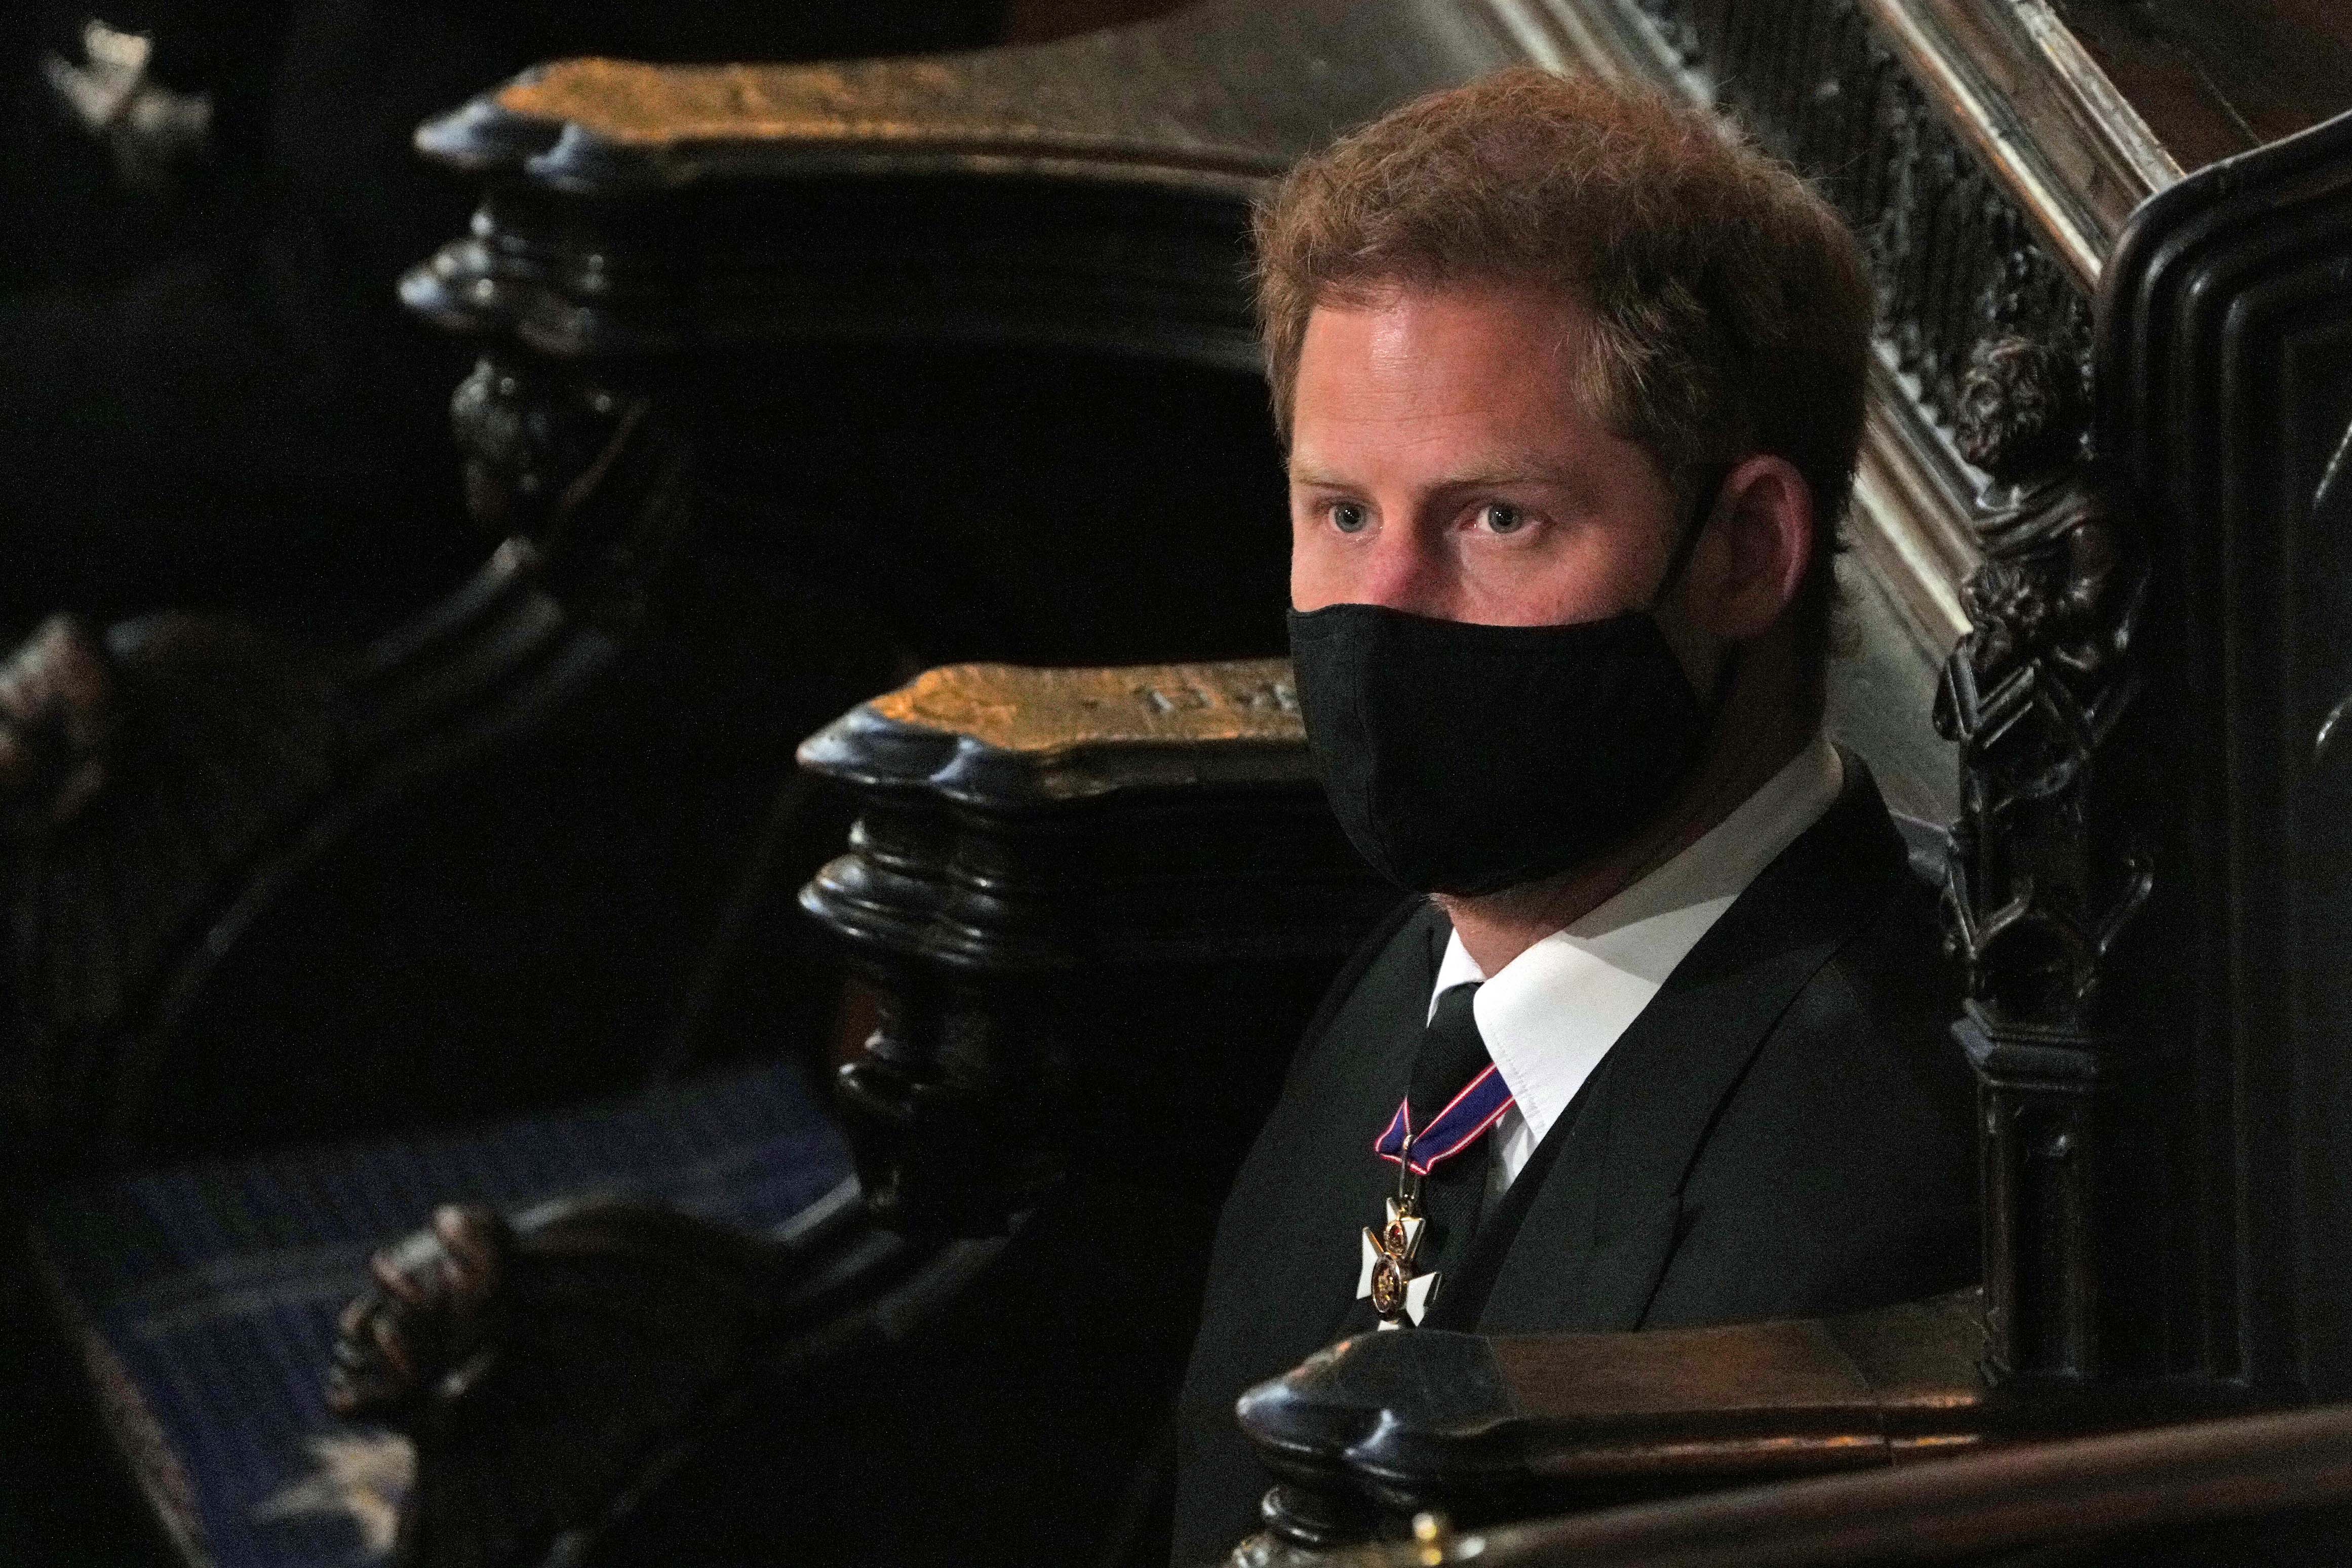 Prince Harry wearing a mask during the funeral of Prince Philip in St. George’s Chapel at Windsor Castle